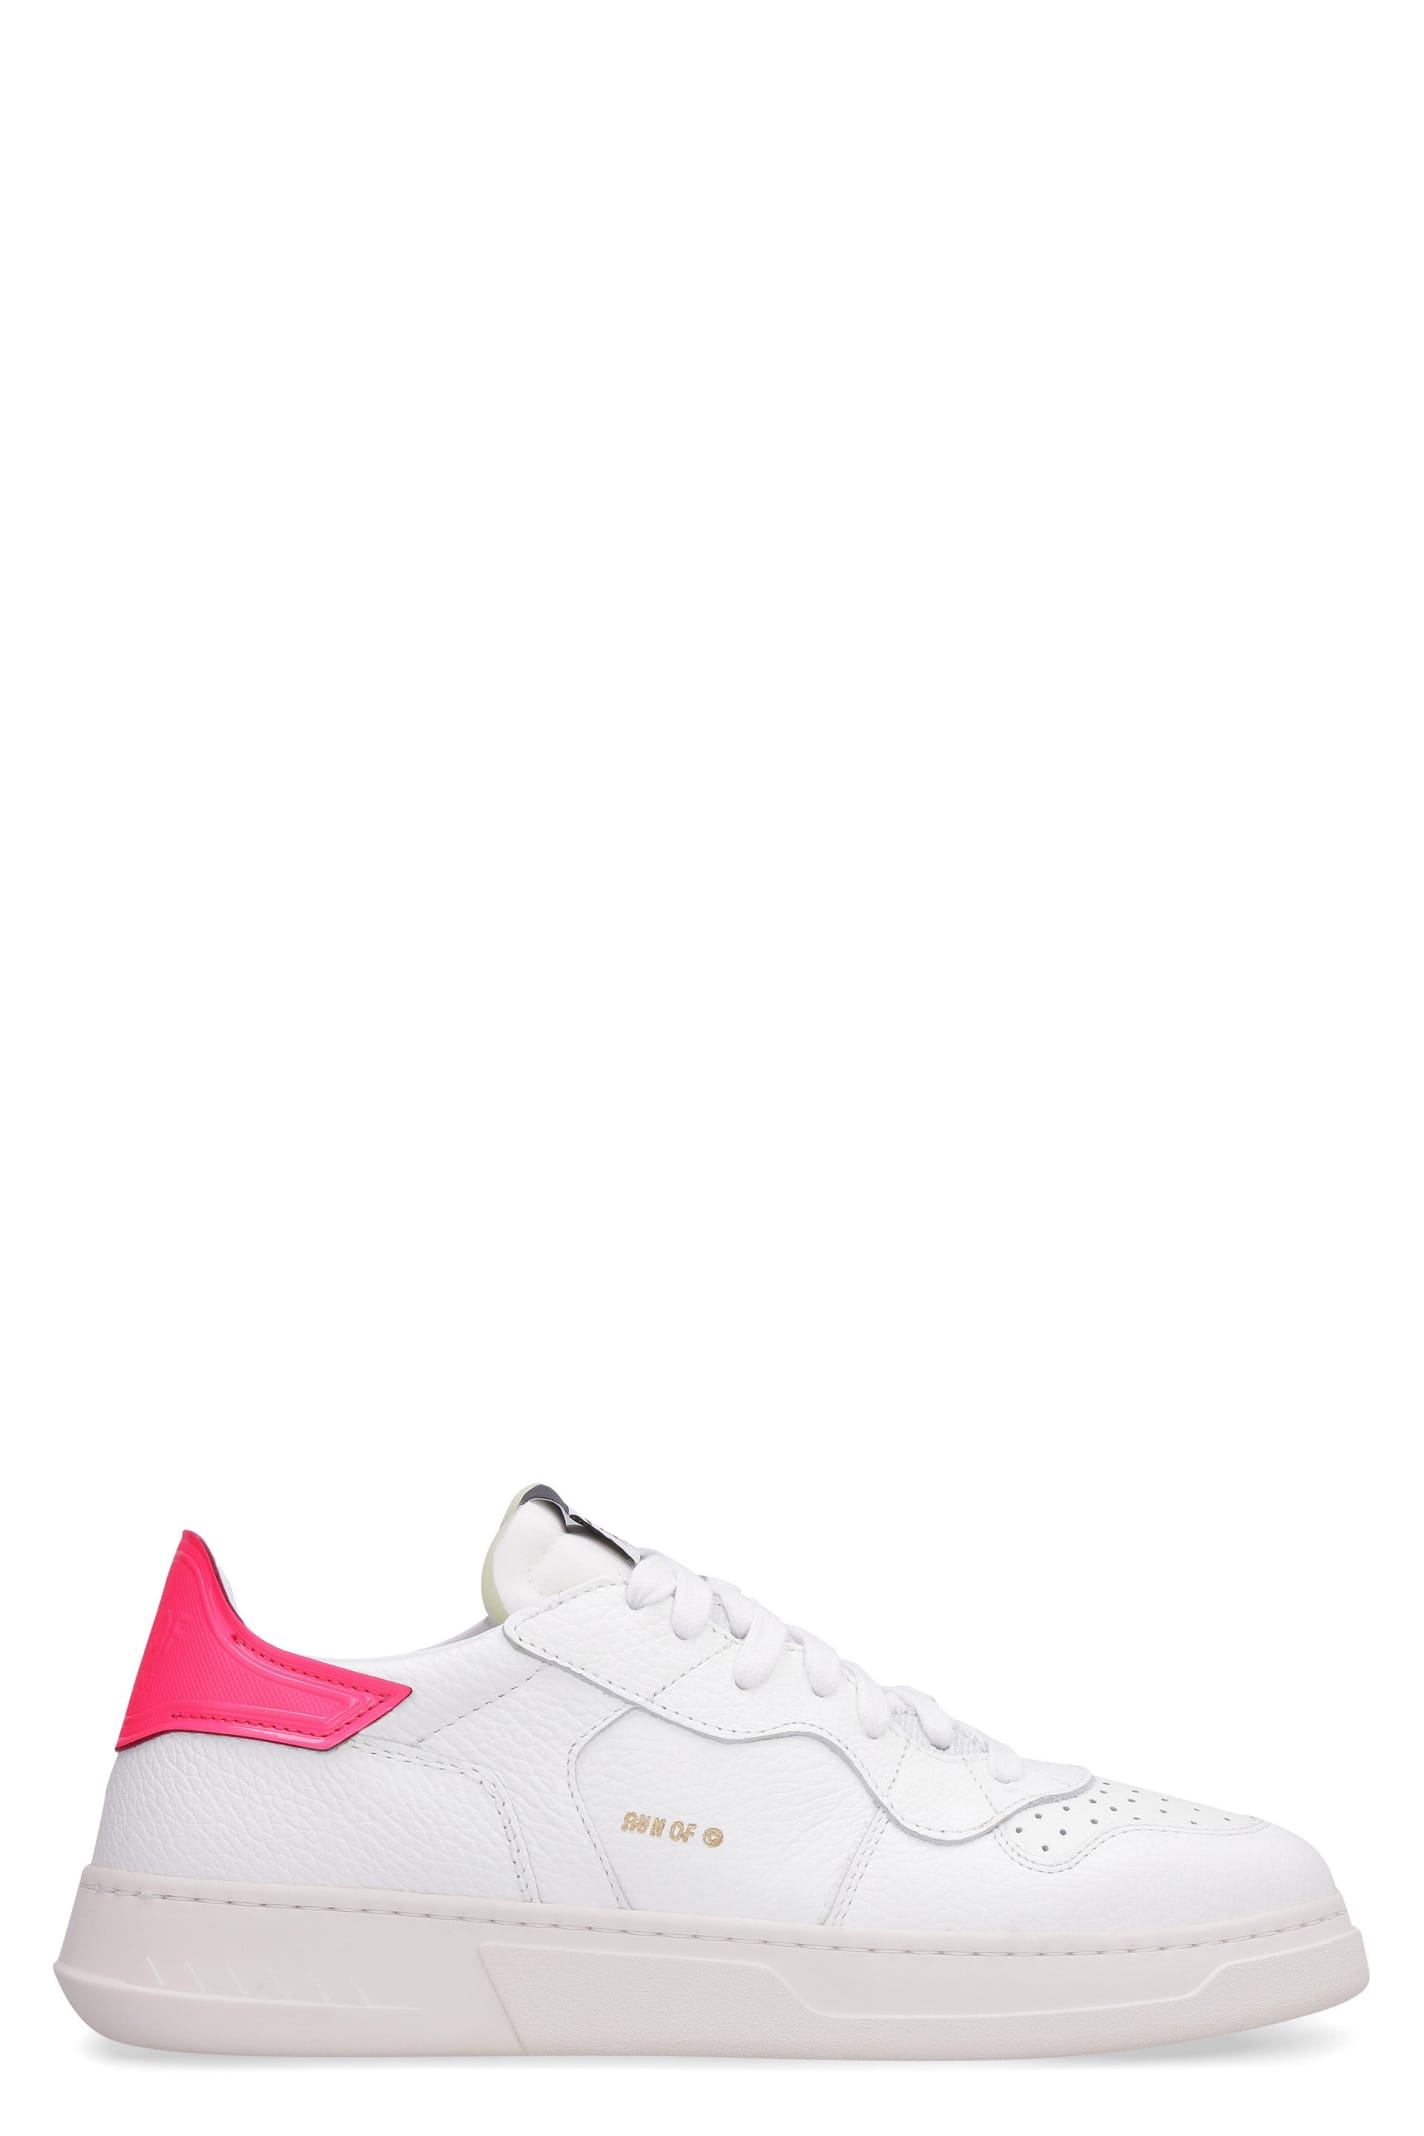 RUN OF Class-p Leather Low-top Sneakers